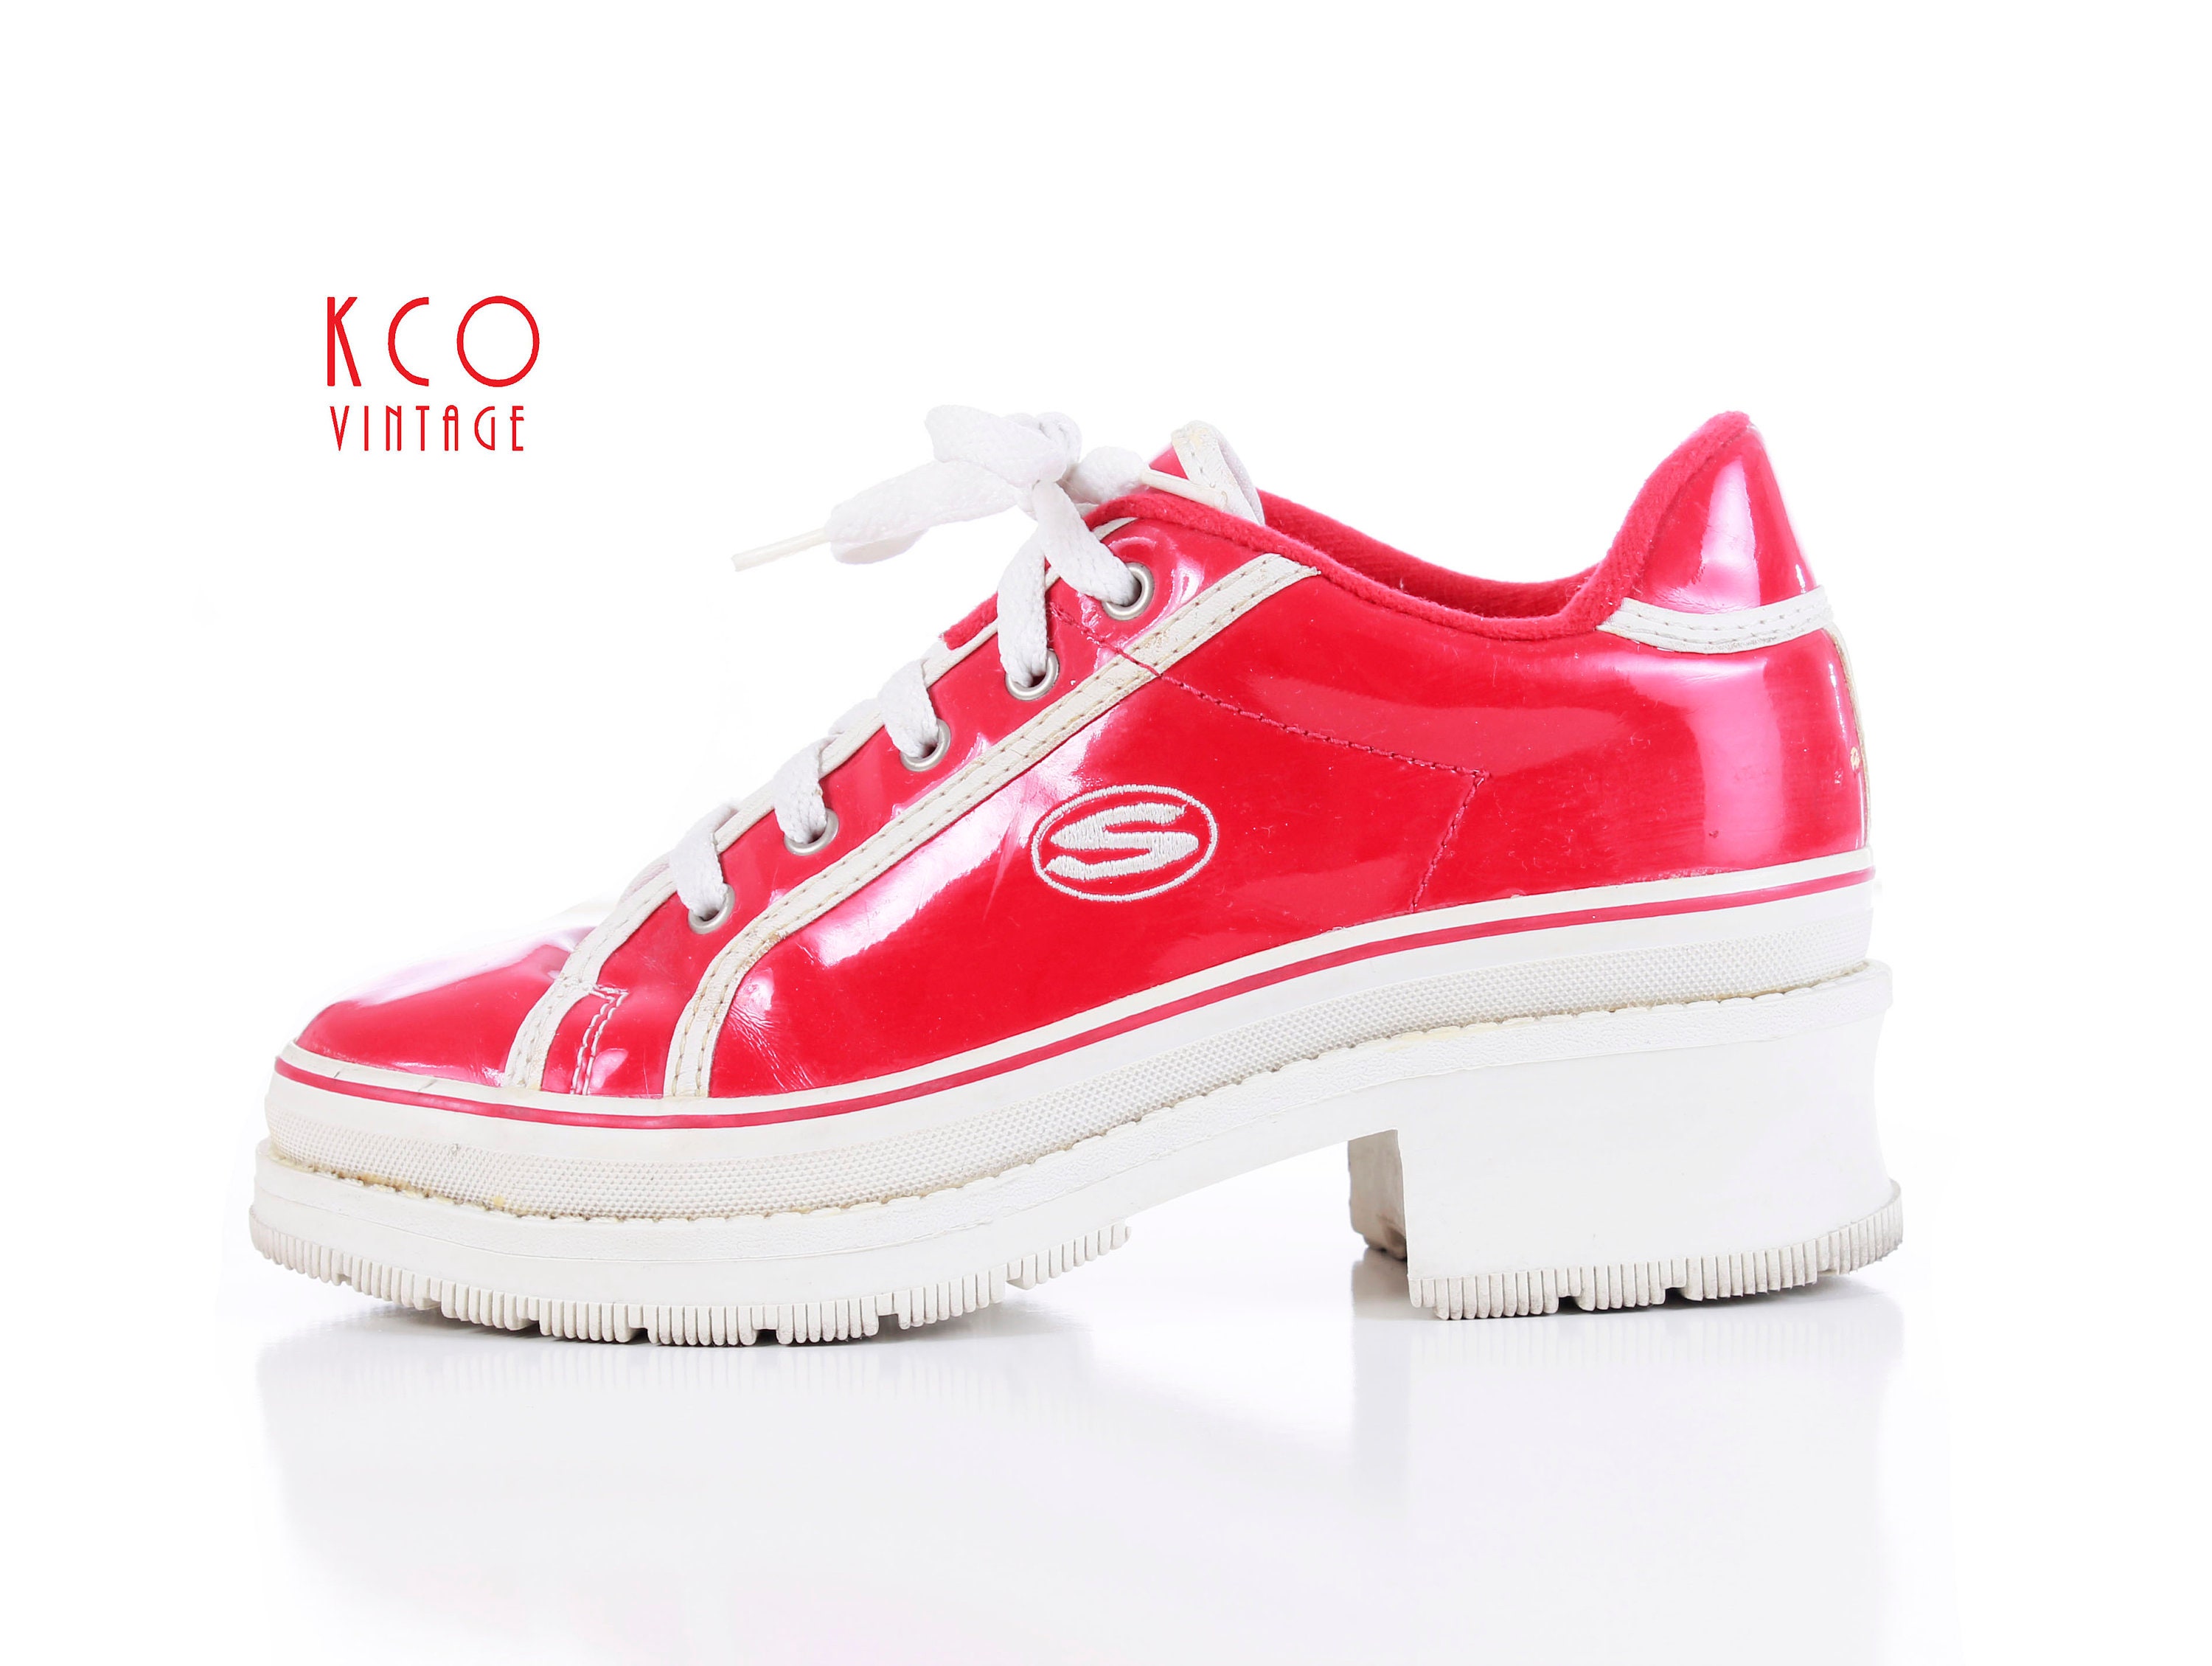 SKECHERS Patent Leather Fashion Sneakers